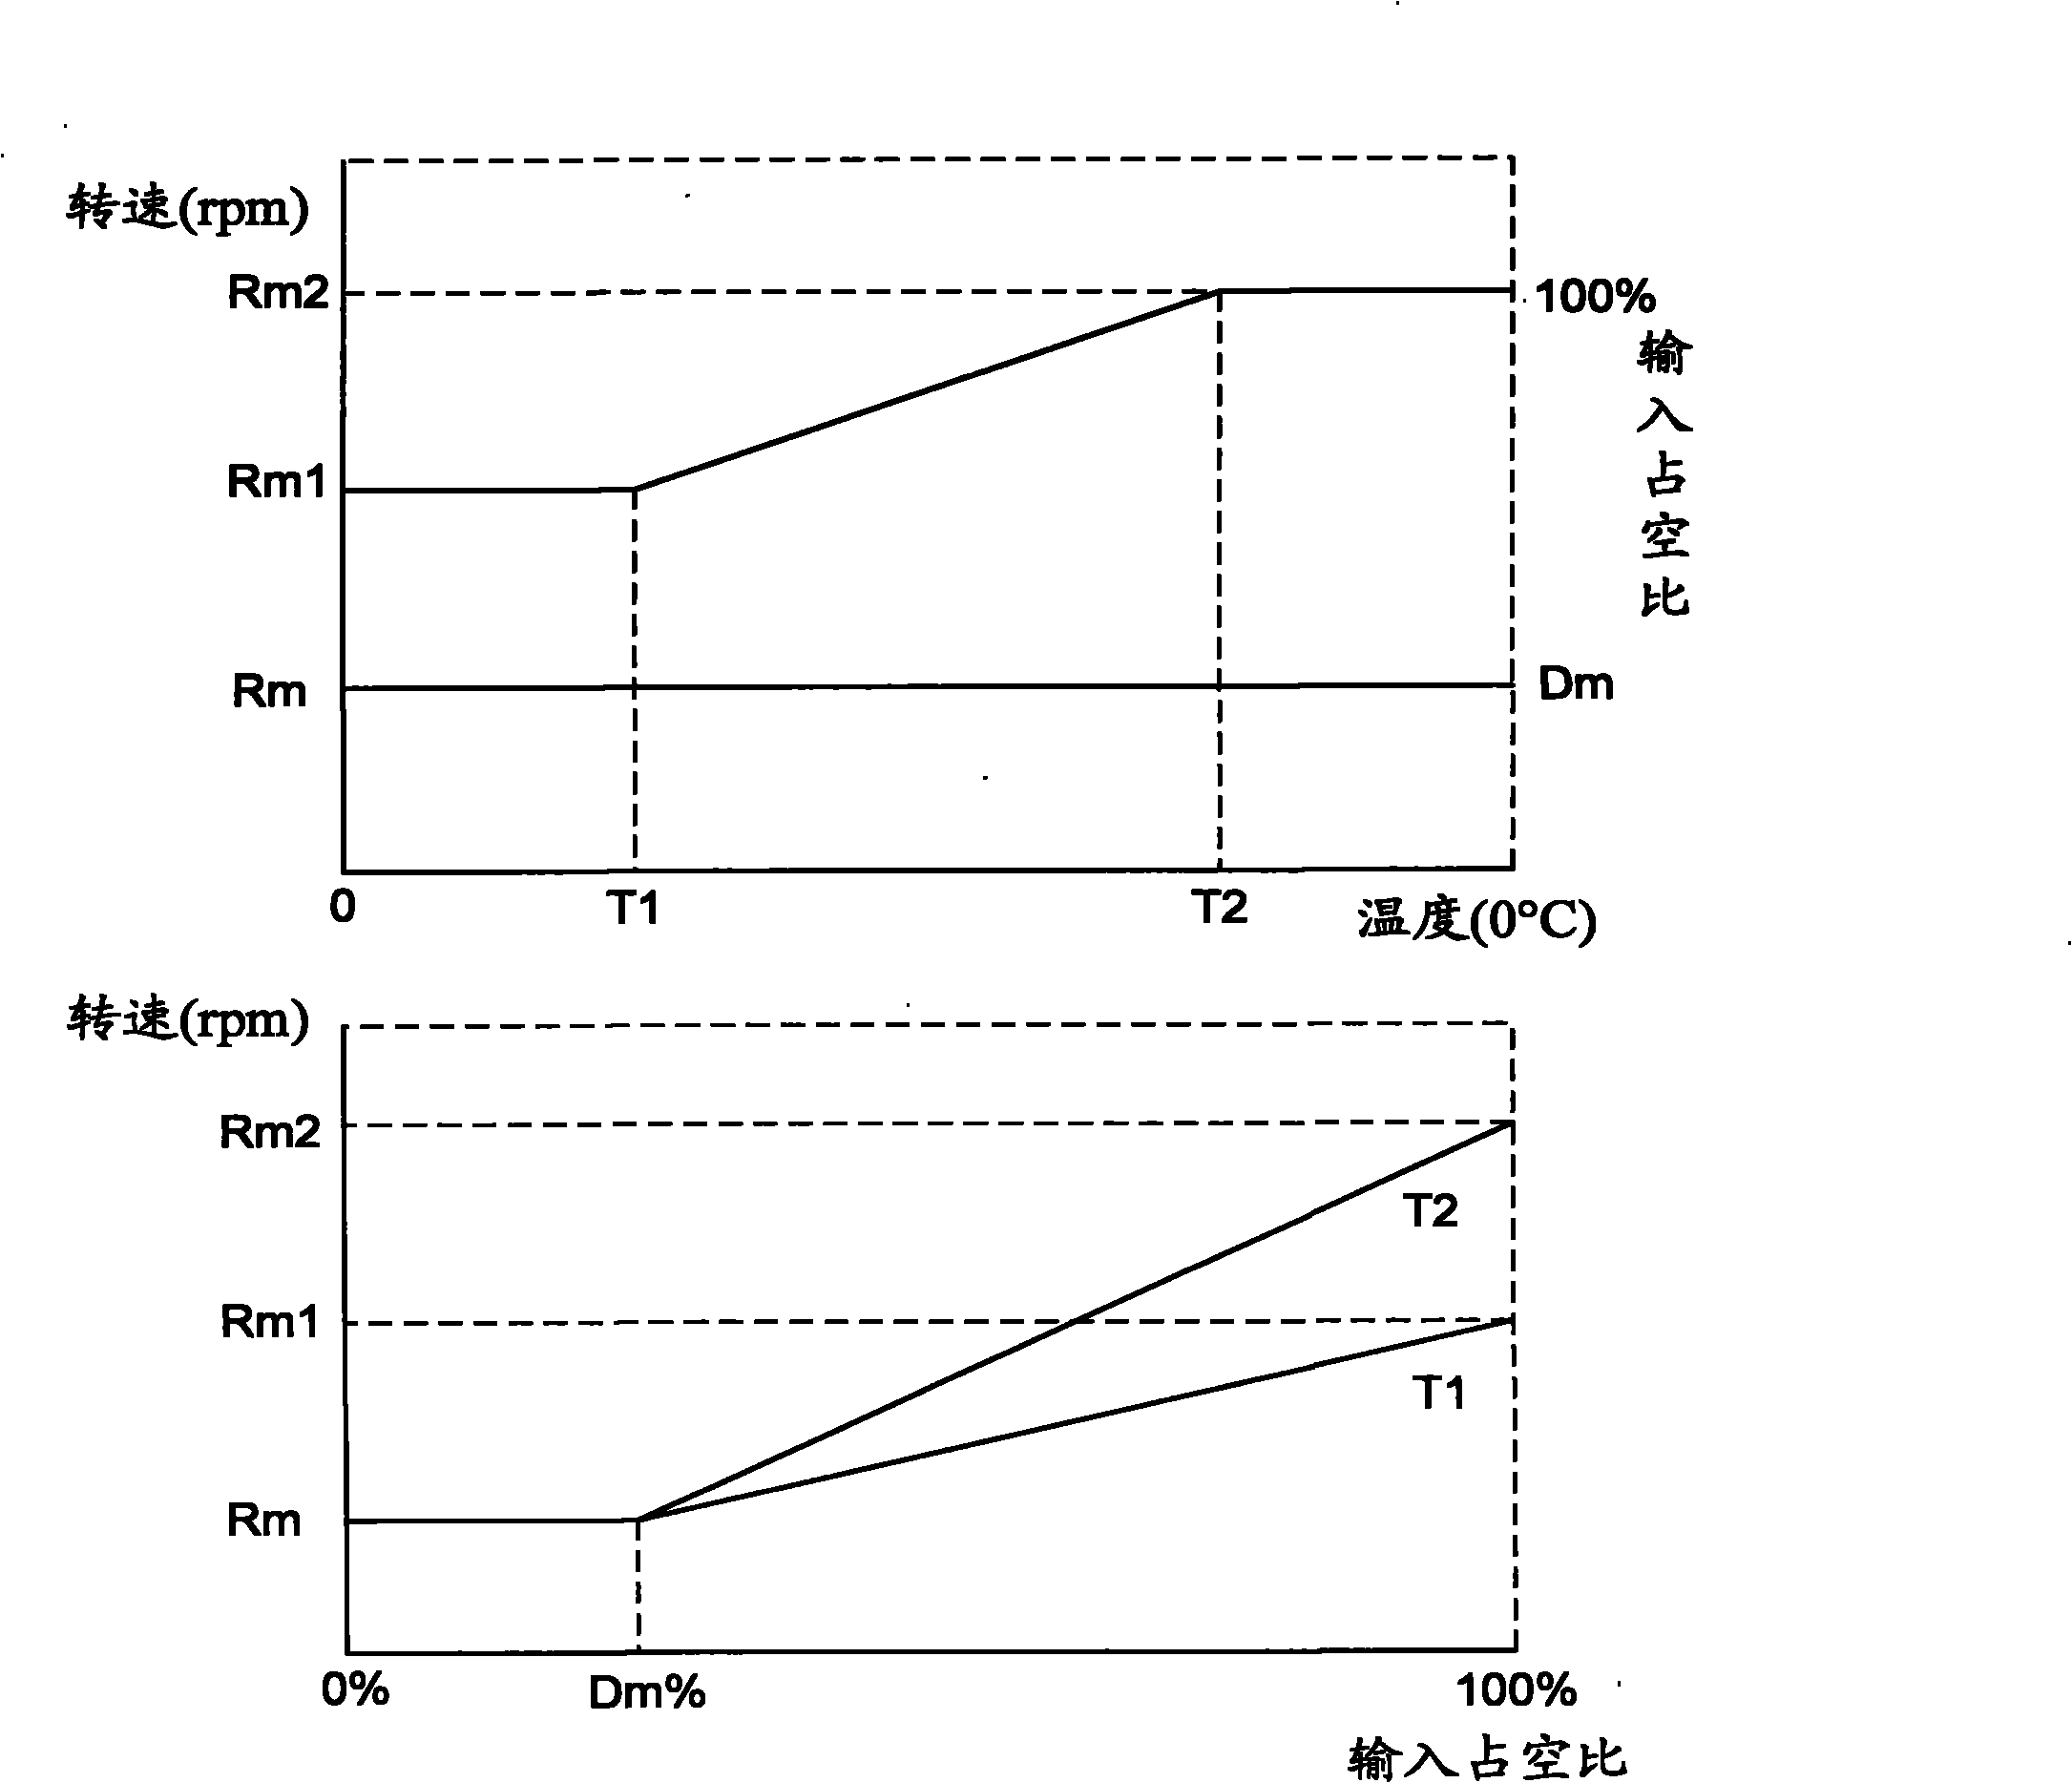 Control pulse generating circuit and regulating system and method of direct current brushless motor speed